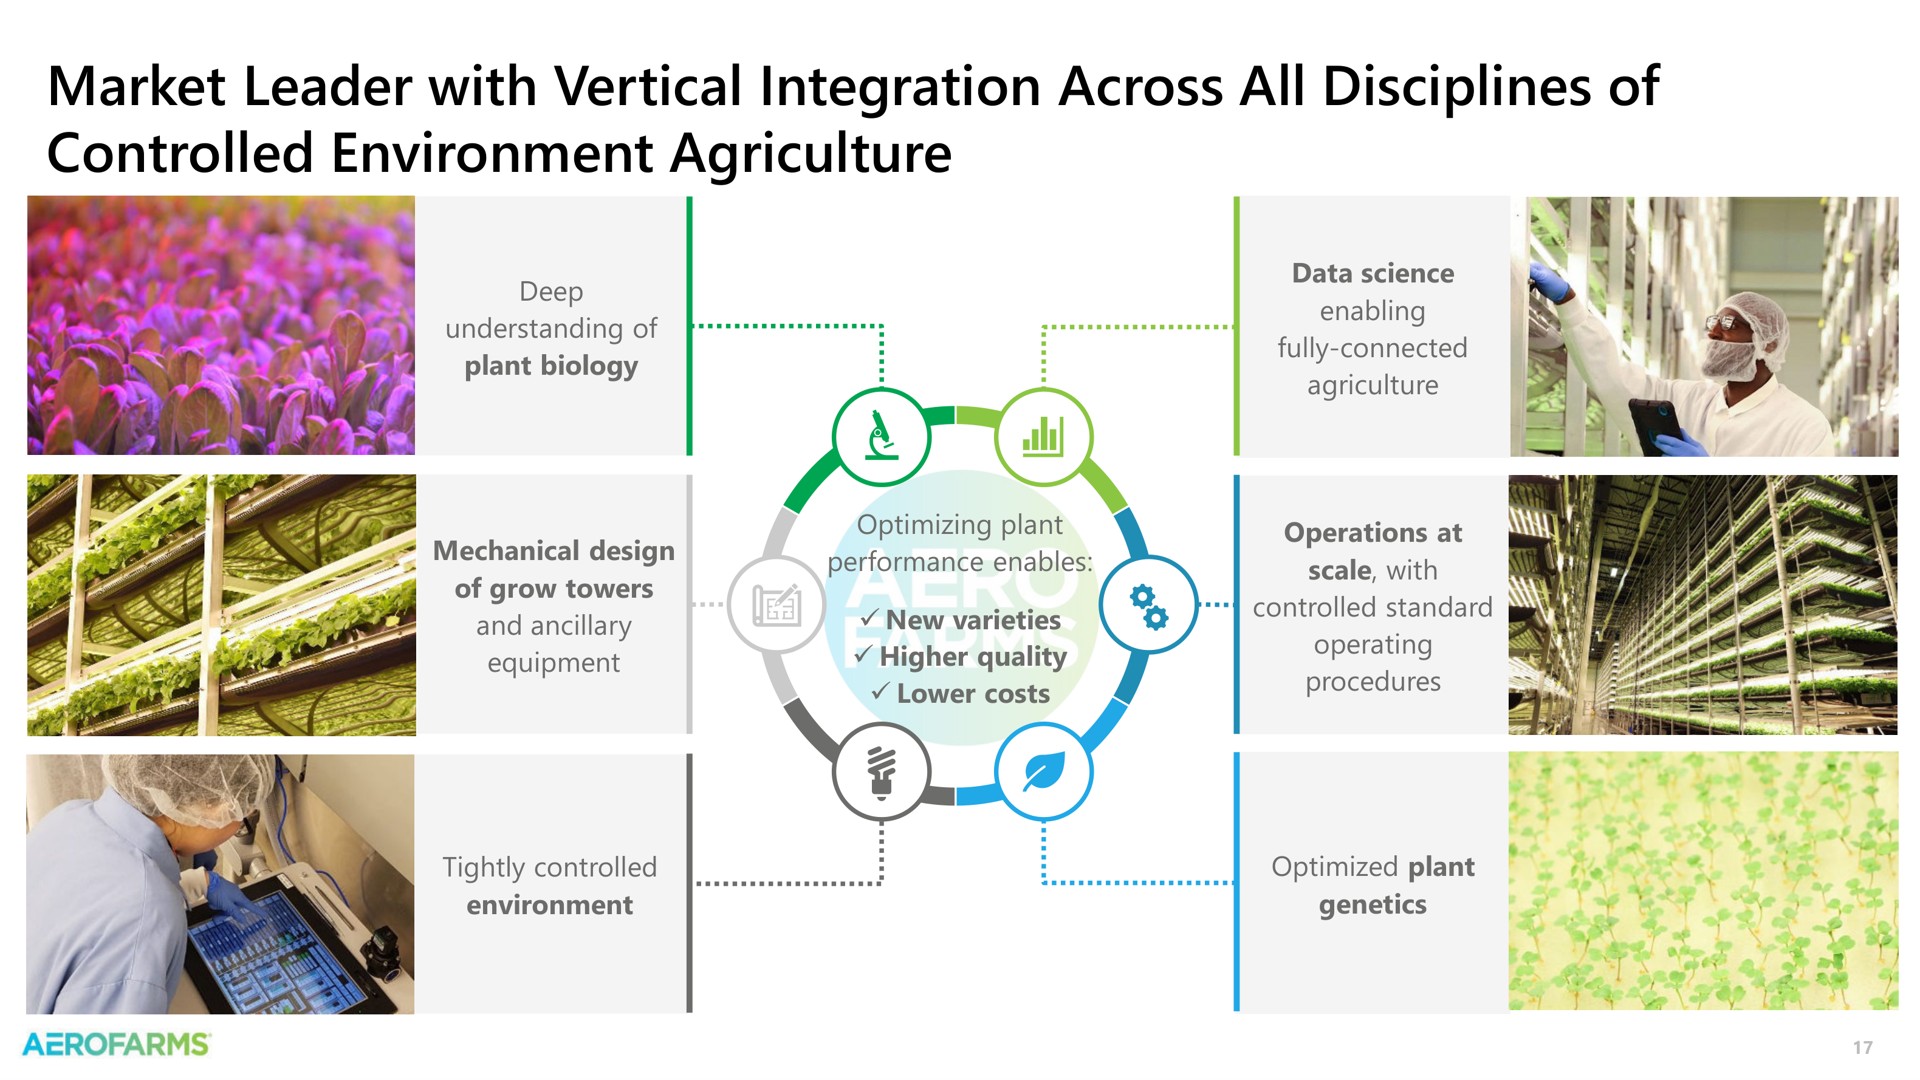 market leader with vertical integration across all disciplines of controlled environment agriculture | AeroFarms